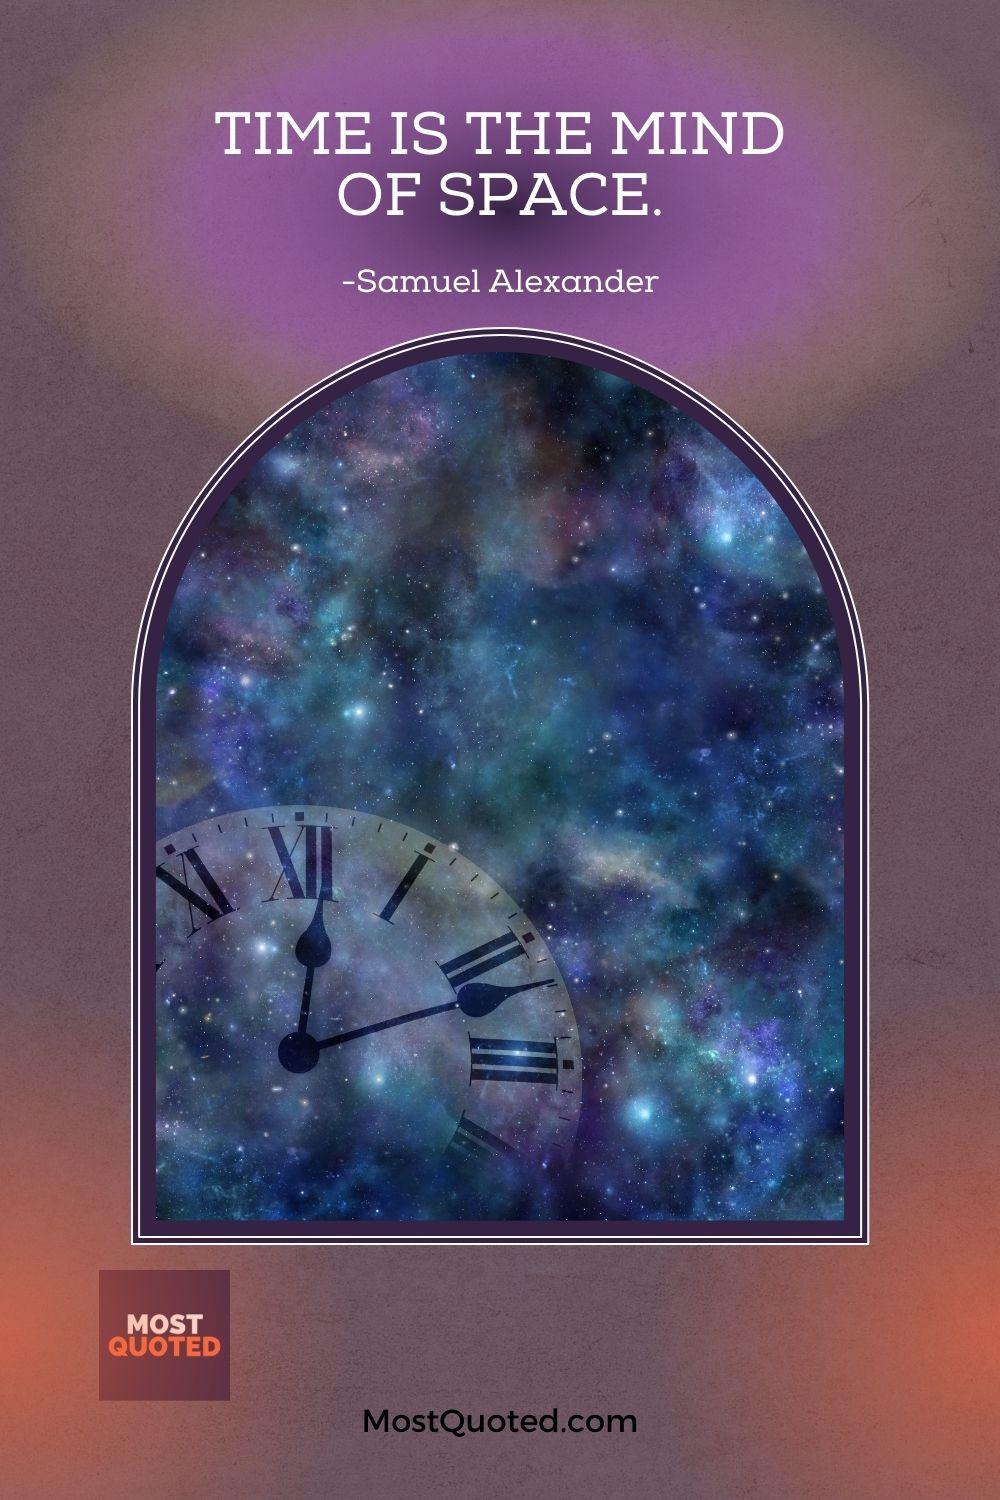 Time is the mind of space. - Samuel Alexander